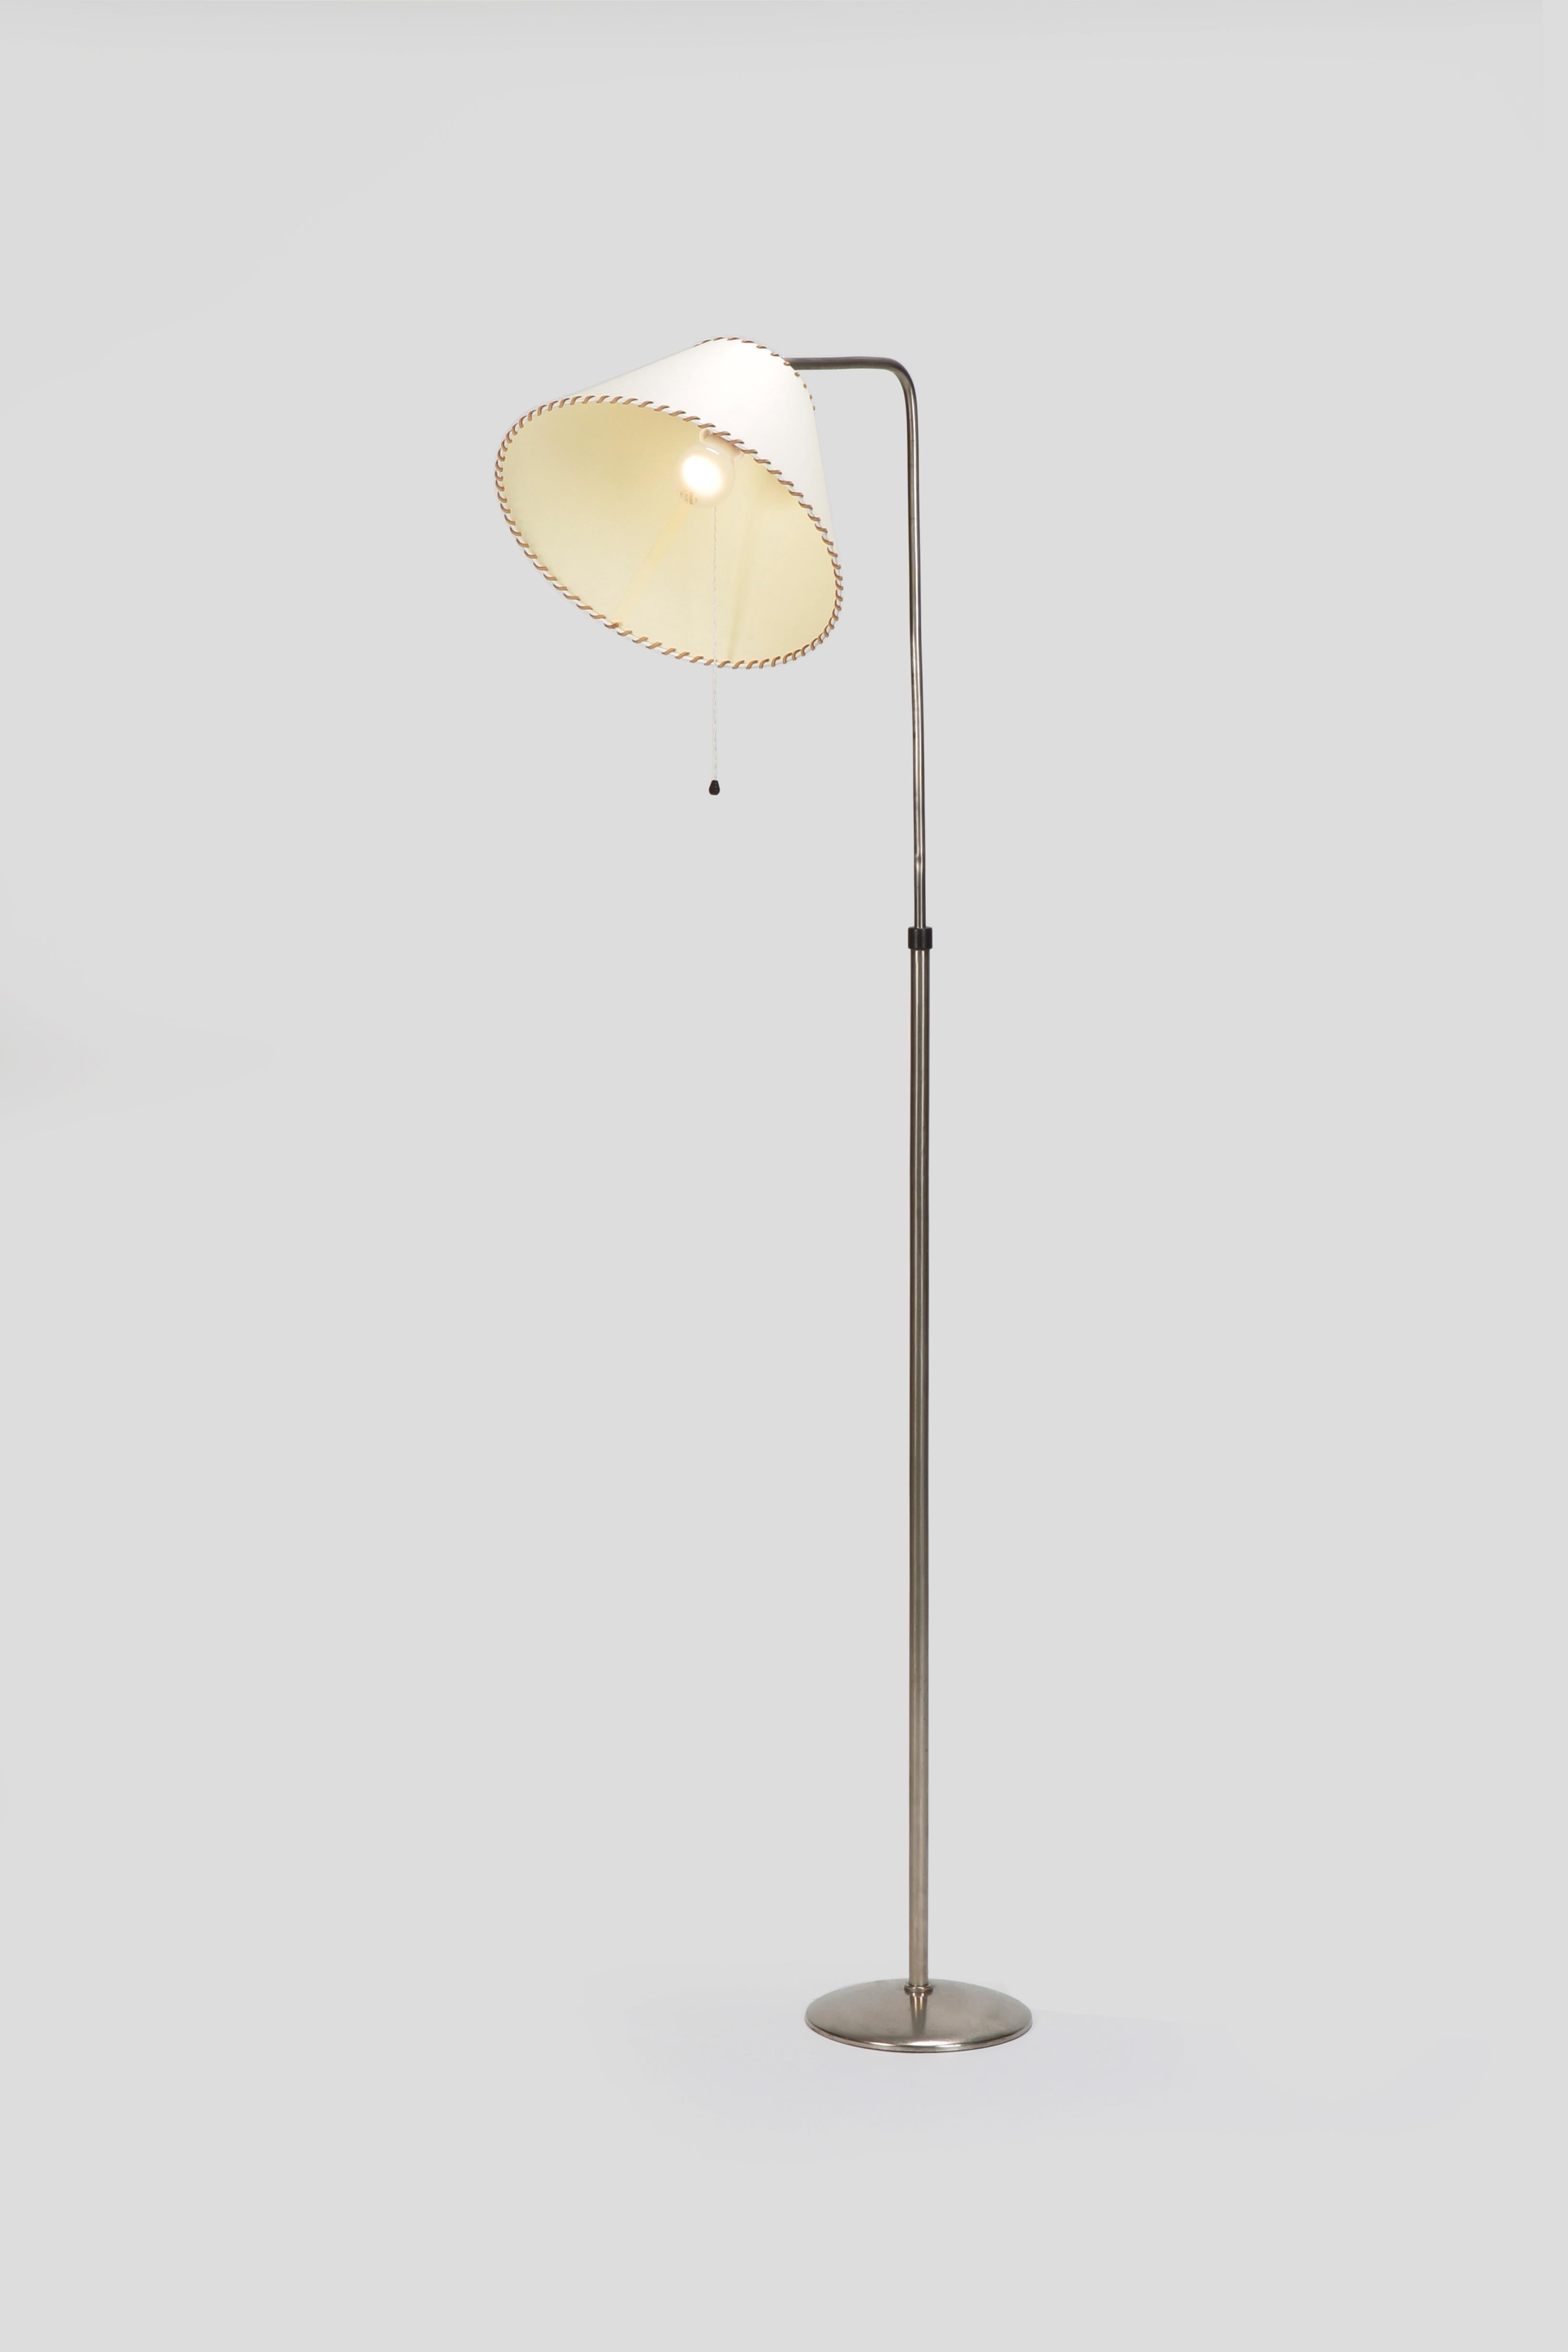 Sigfried Giedion floor lamp manufactured by BAG Turgi in the 1940s in Switzerland. Won the price “die Gute Form” in 1952. The parchment lampshade is seamed with suede leather. Measures: The height can be adjusted from 116 cm to 175 cm.